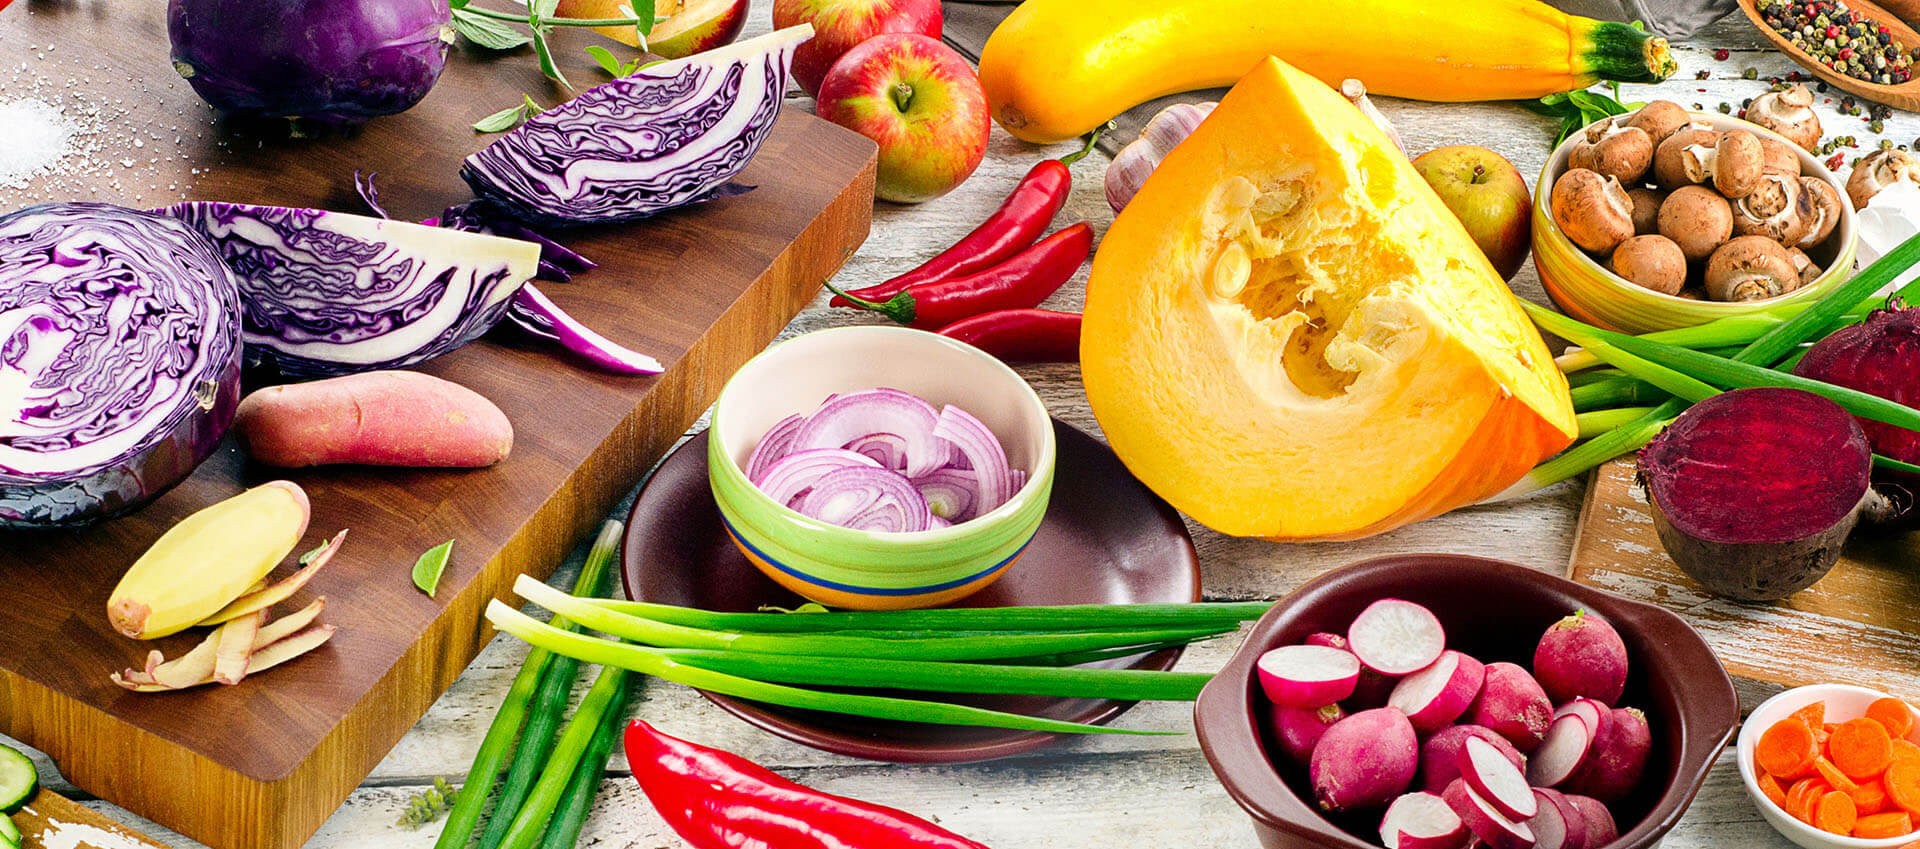 Vibrant healthy foods spread out on a table.